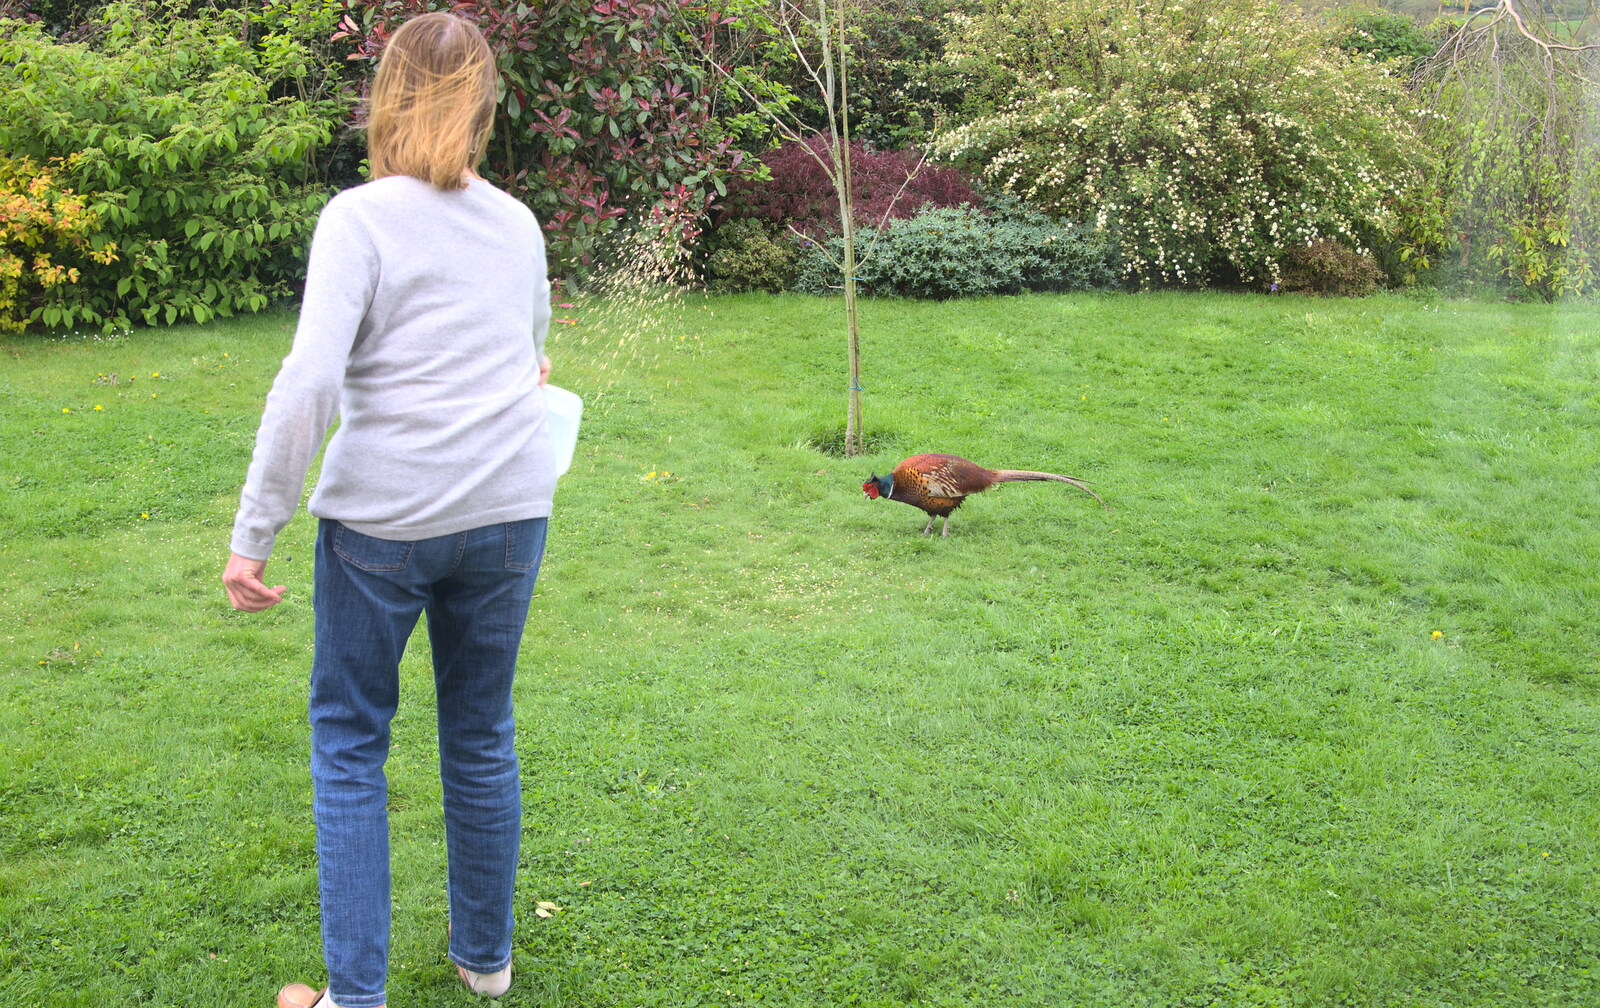 Mother feeds her pet pheasants from A Barbeque, Grimspound and Pizza, Dartmoor and Exeter, Devon - 15th April 2017